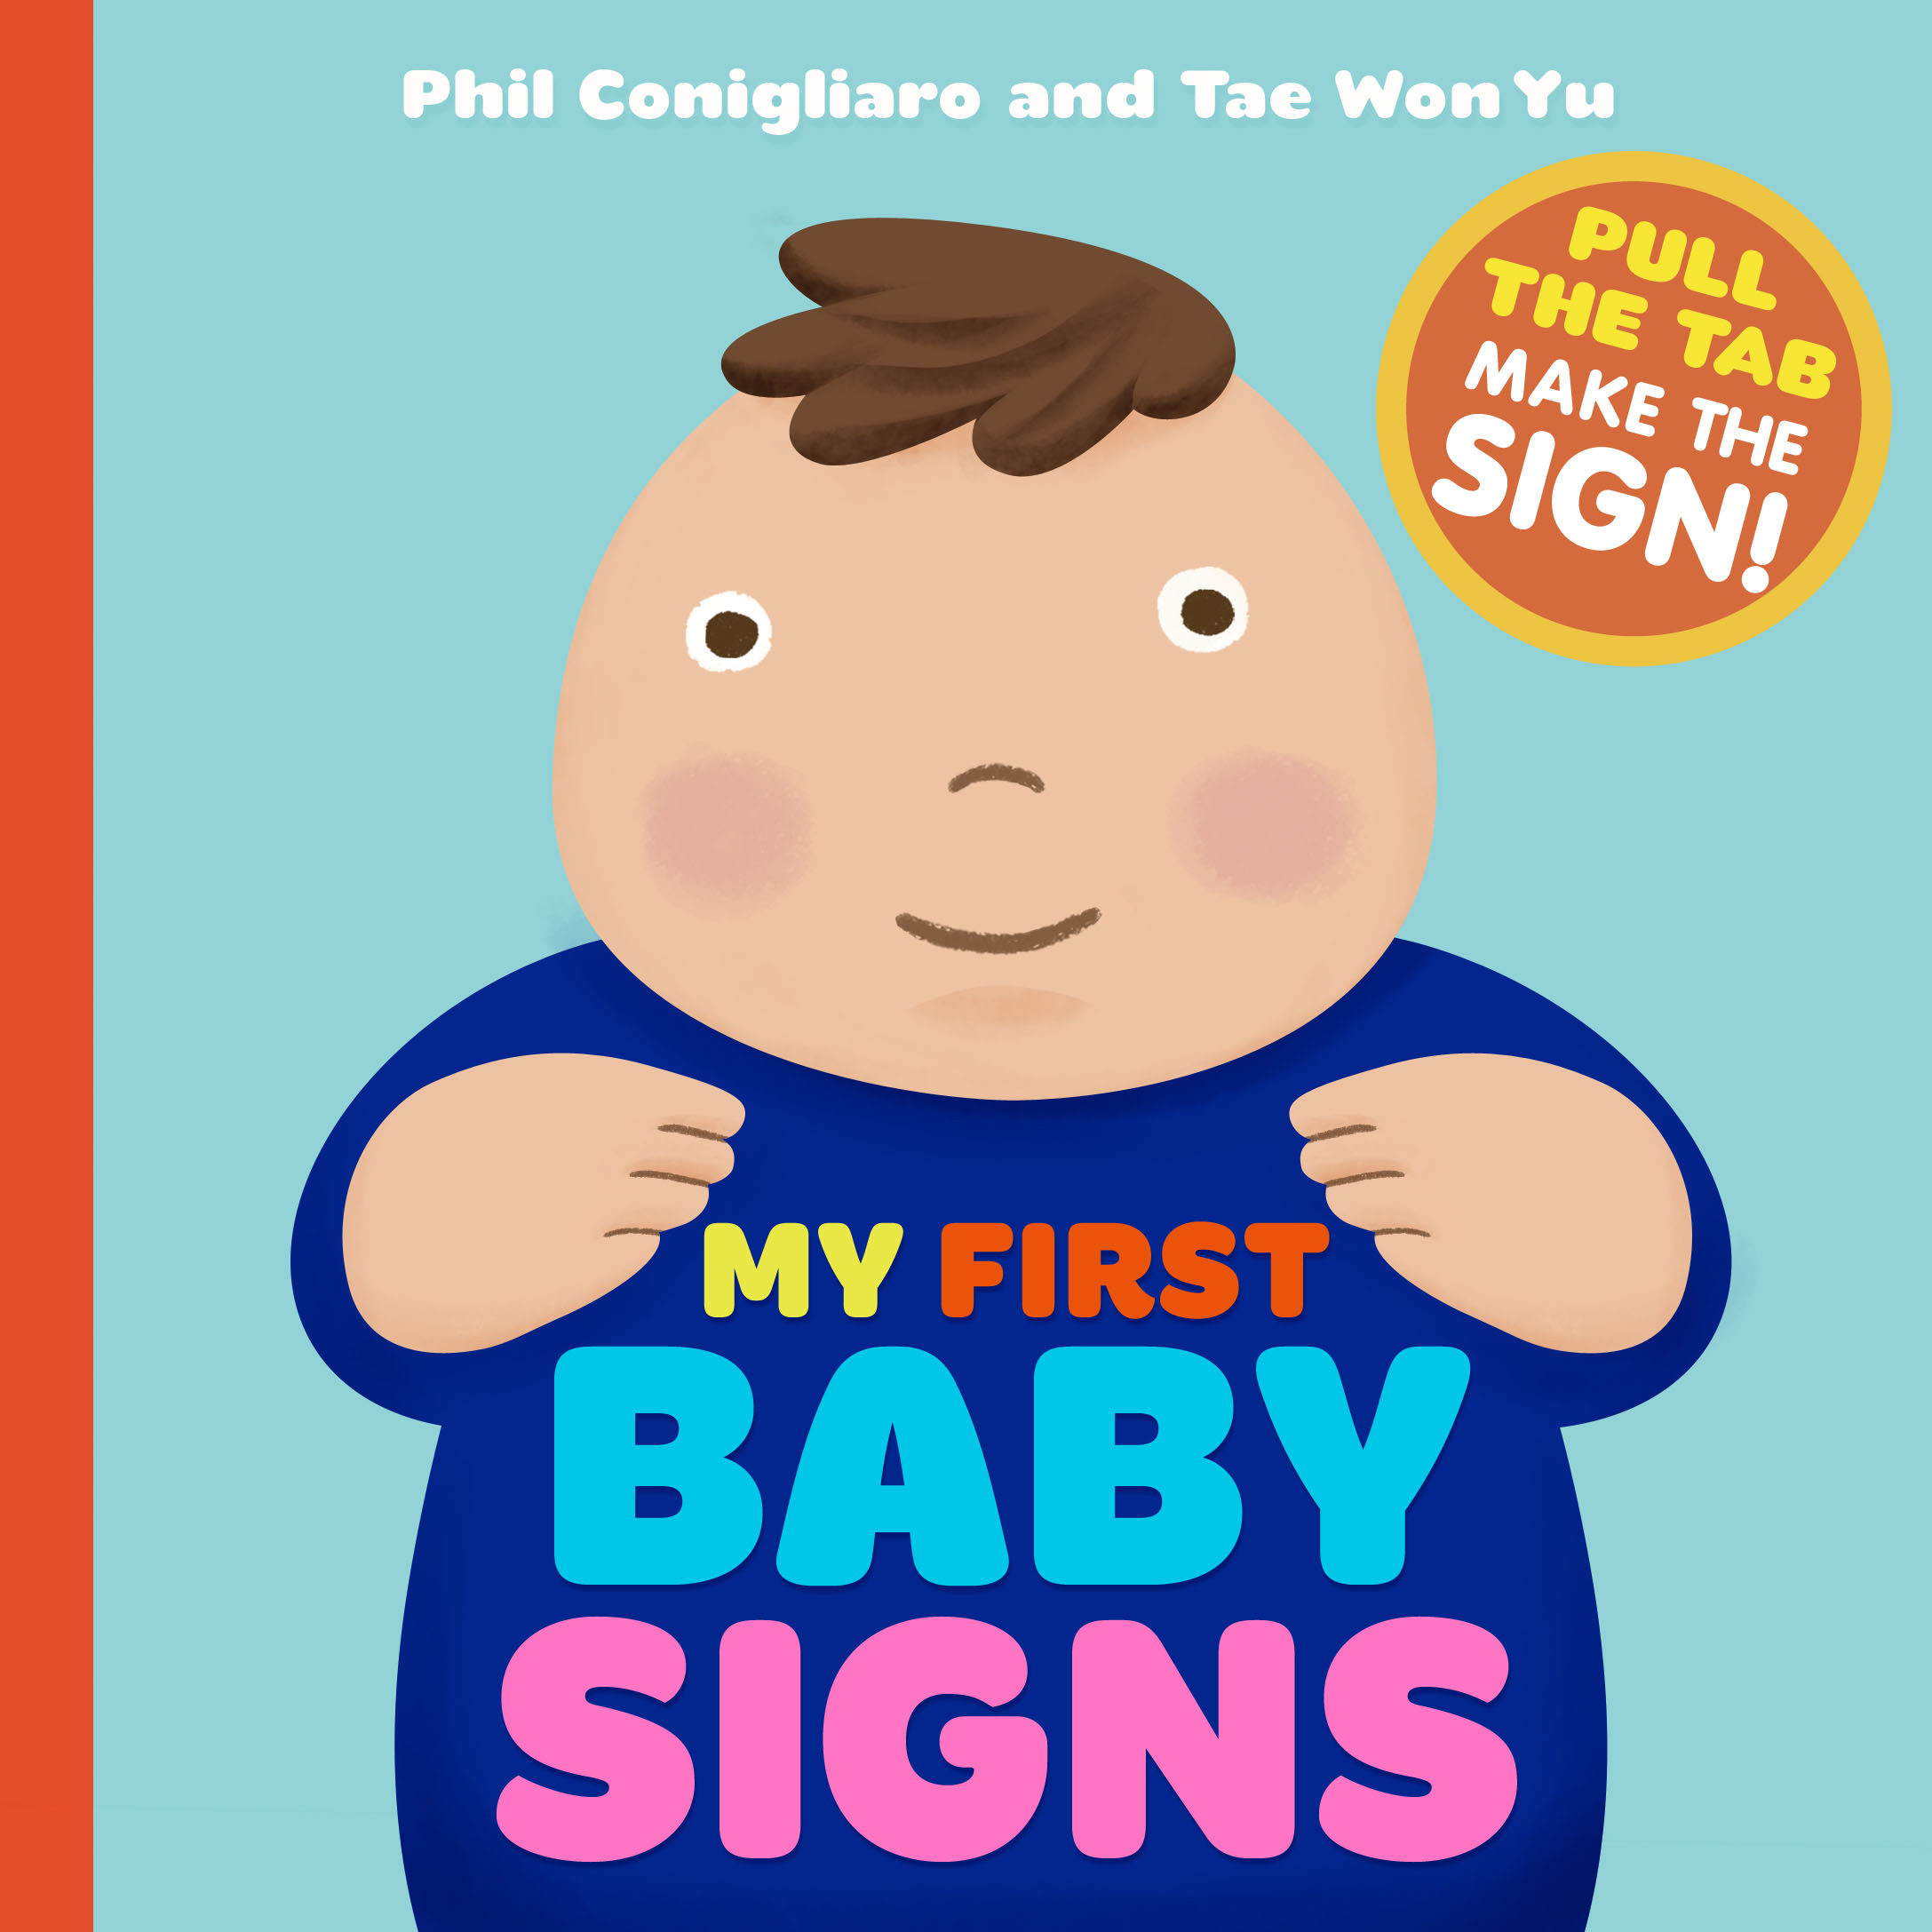 FirstBabySigns